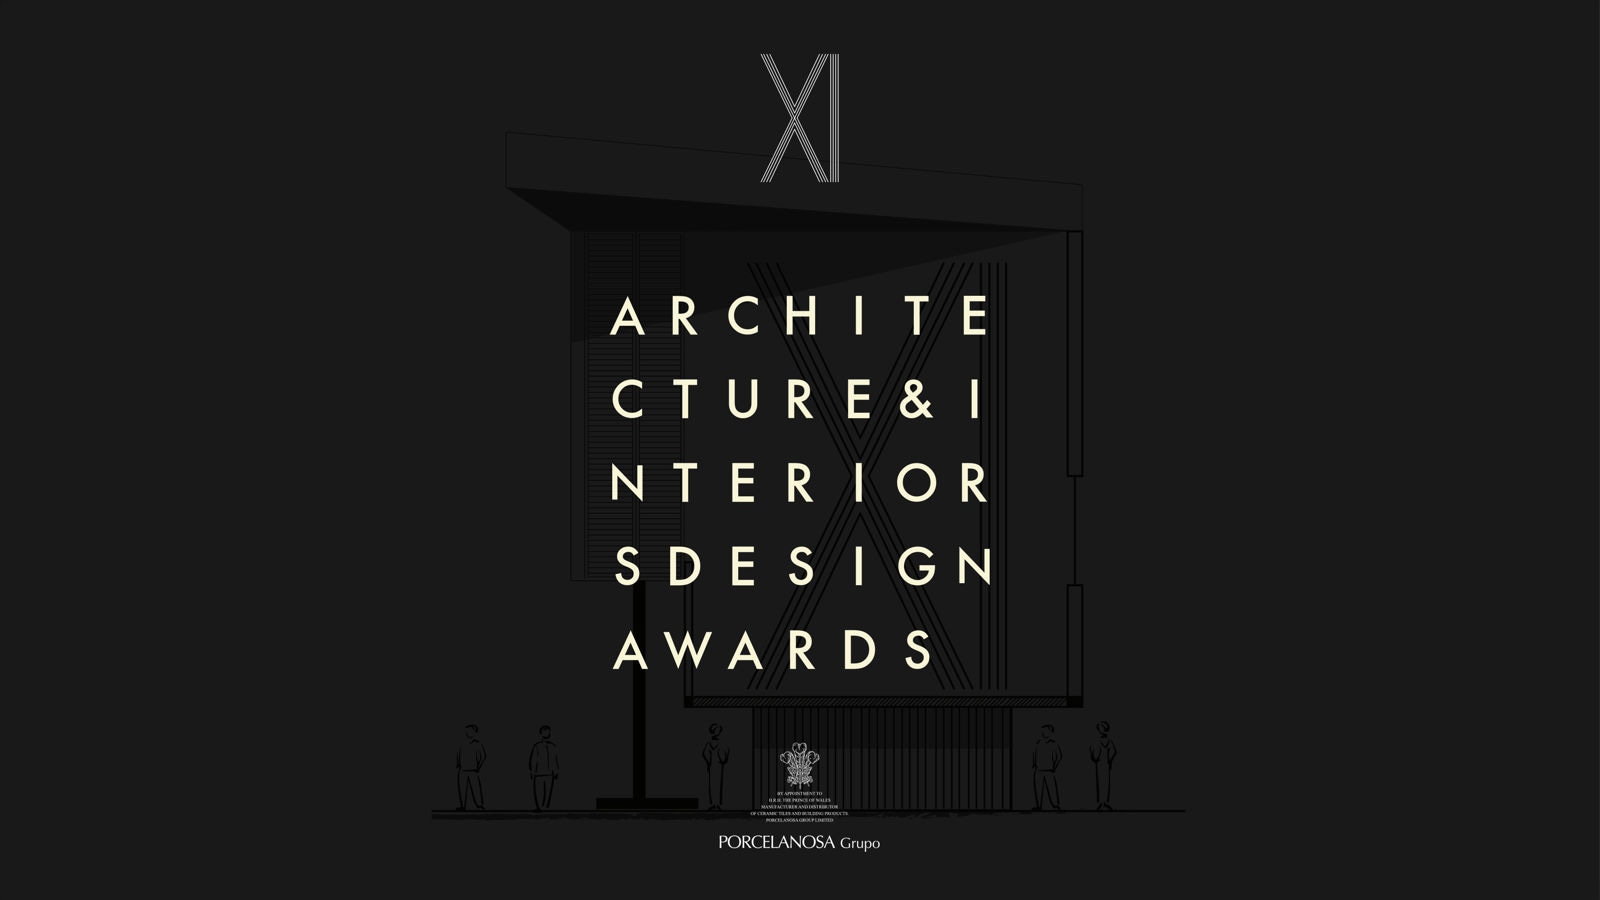 The 11th Architecture and Interior Design Awards gets underway